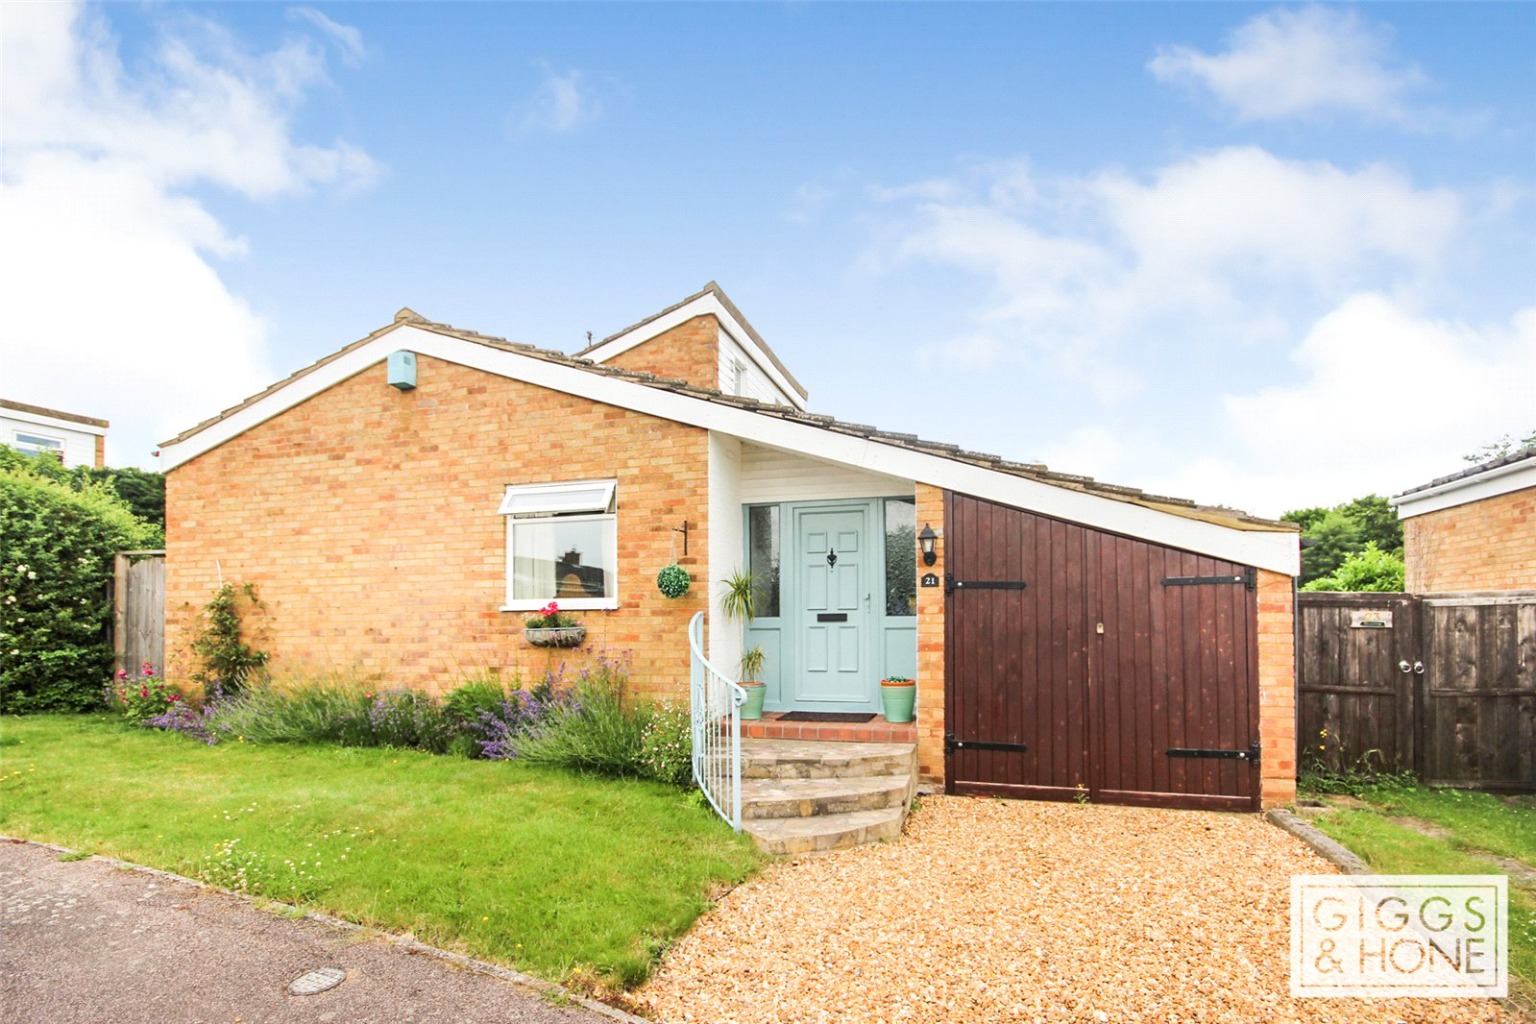 Located in a quite Cul De Sac just off Hookhams Lane in the sought after village of Renhold  this detached three bedroom chalet bungalow has been lovingly modernised by it's current owners.